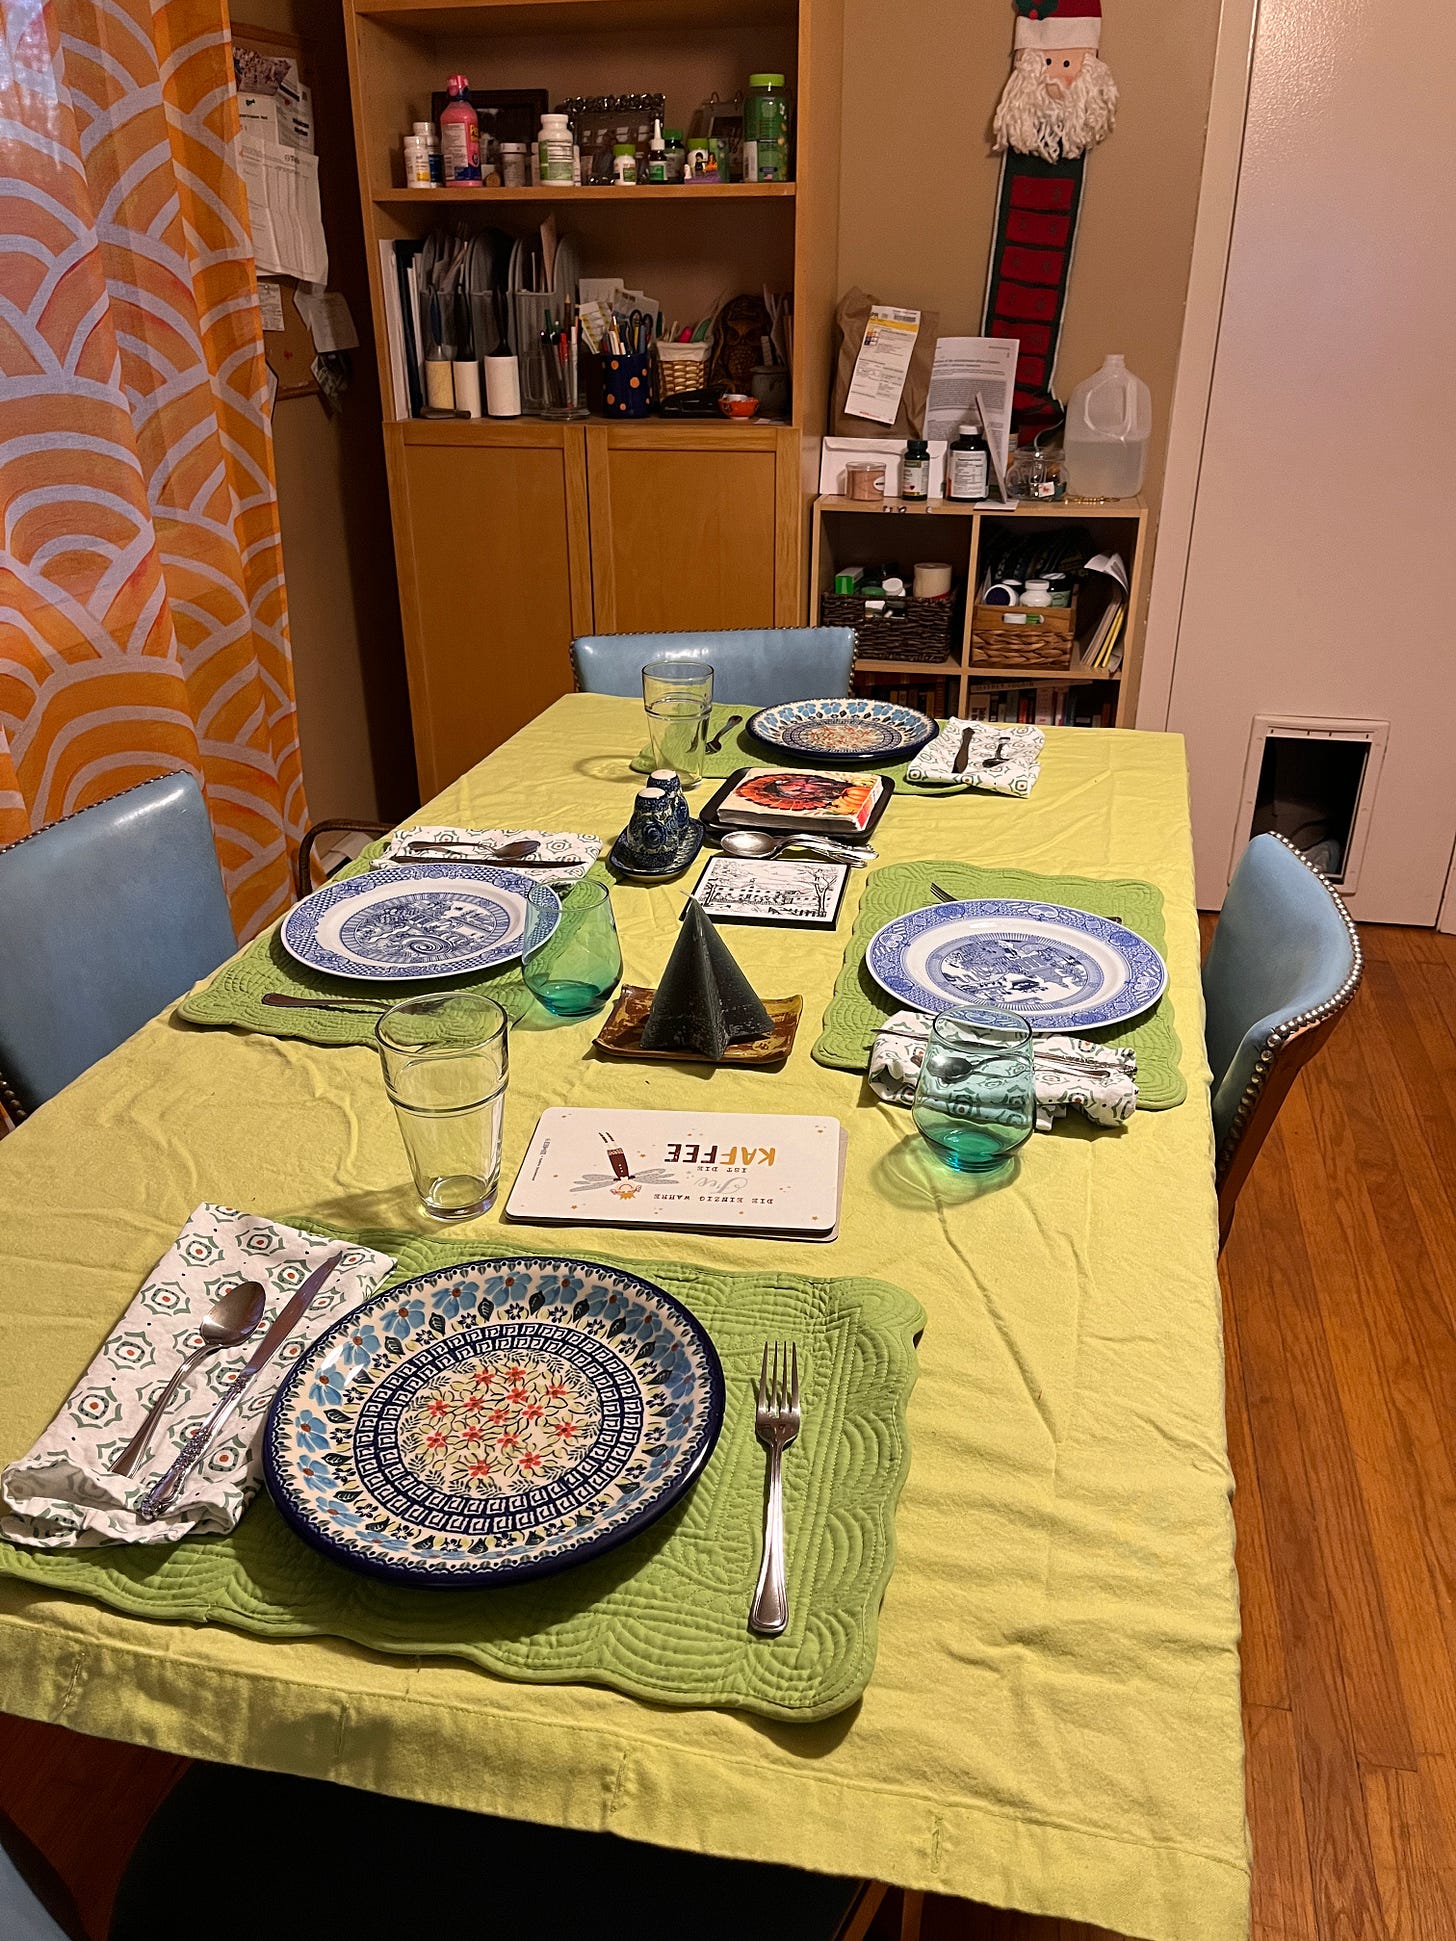 A table set with a mix of blue and white plates on a lime-green cloth, sorta wrinkly, on green placemats, four chairs, with a shelf behind it cluttered with pill bottles and papers, and a curtain hanging to the left that is gauzy orange.